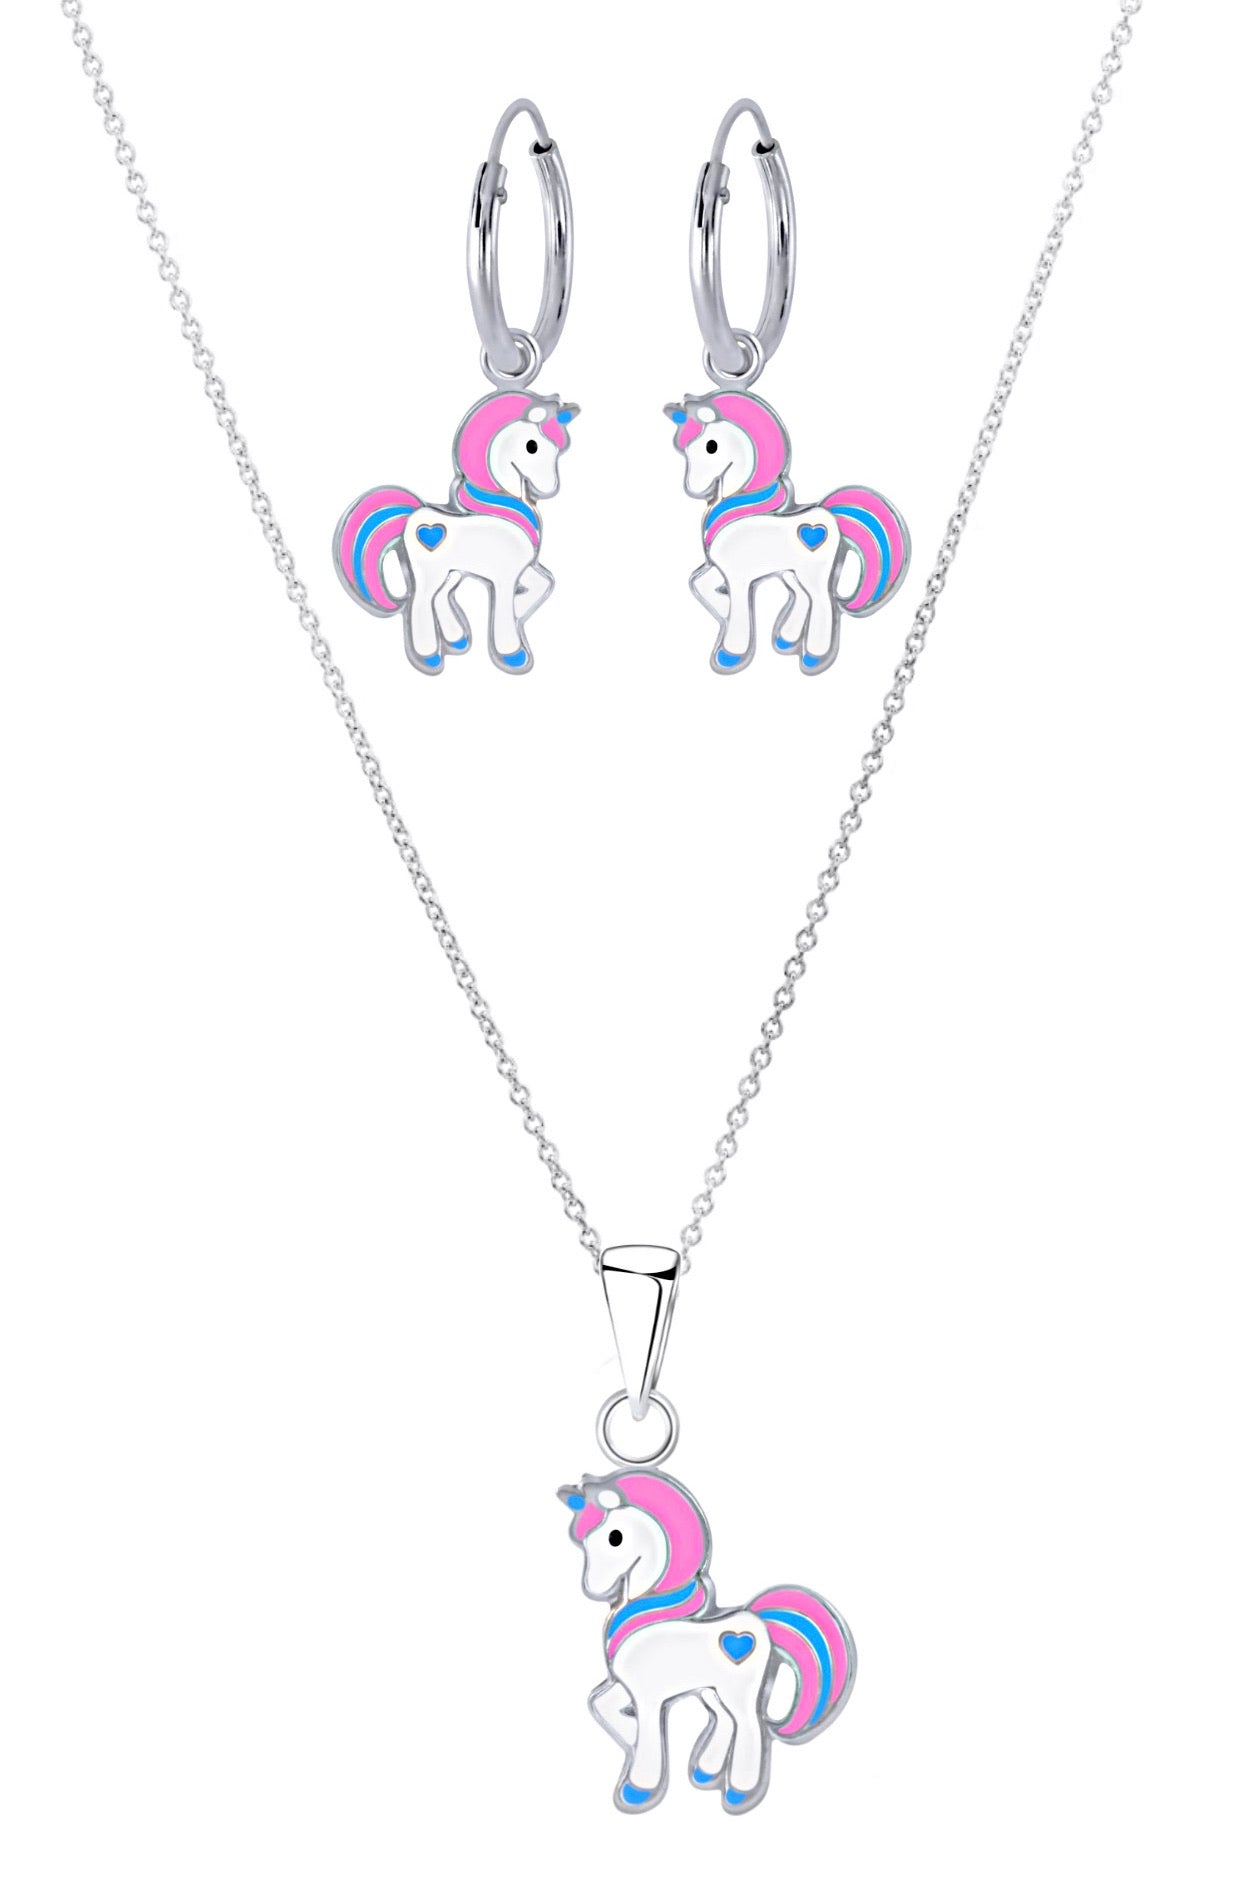 925 Sterling Silver Unicorn With Heart Hoop Earrings and Necklace Set For Kids and Teens - Forever Kids Jewelry